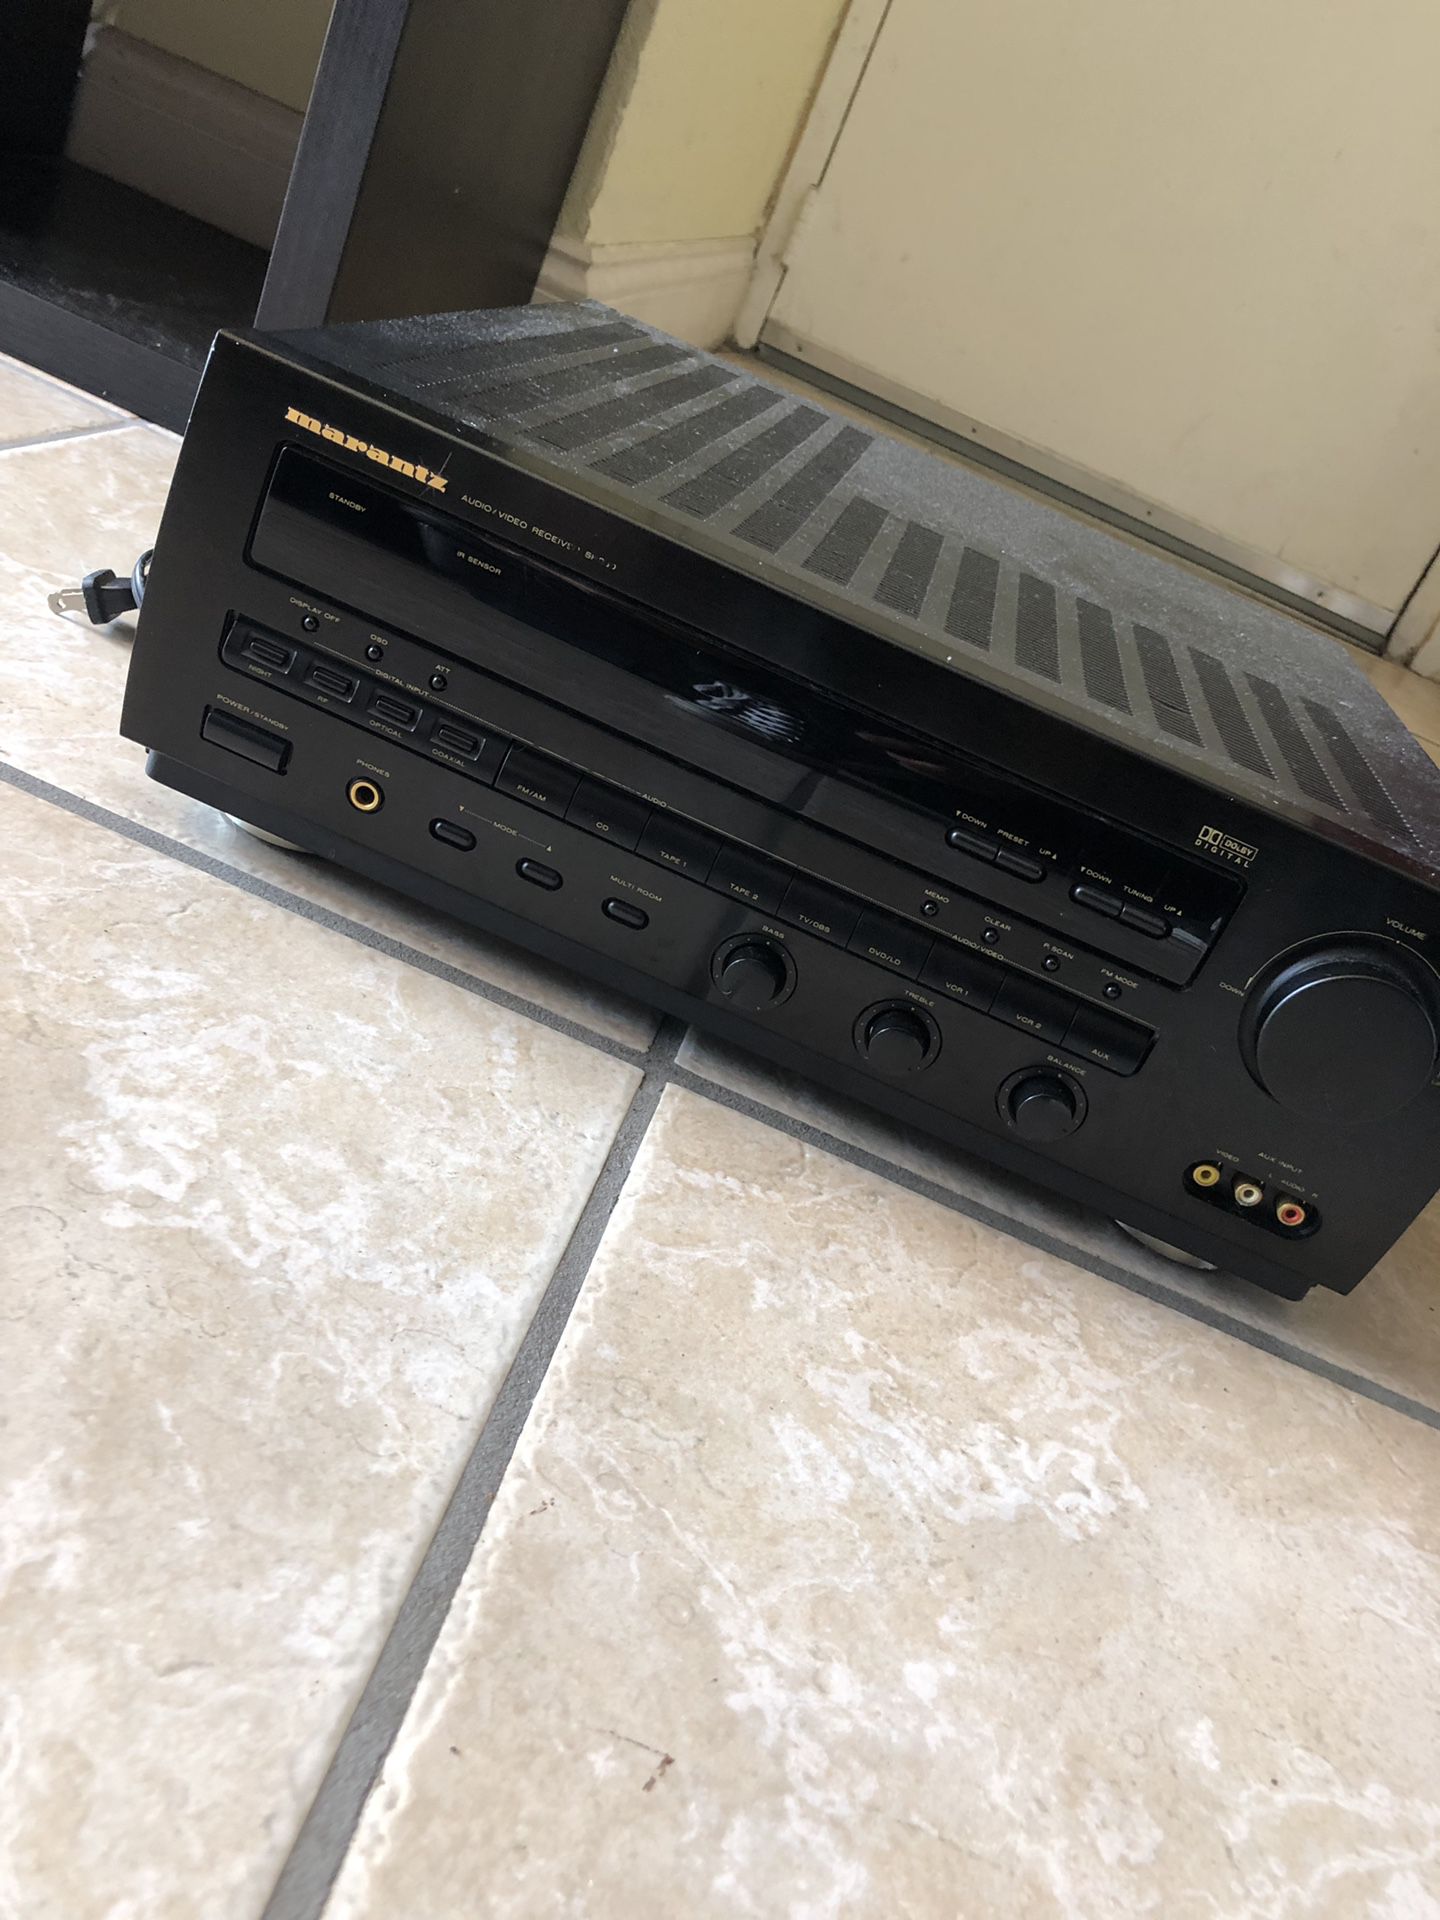 Audio Video Stereo receiver ( Marantz model SR88OU) with subwoofer. $40